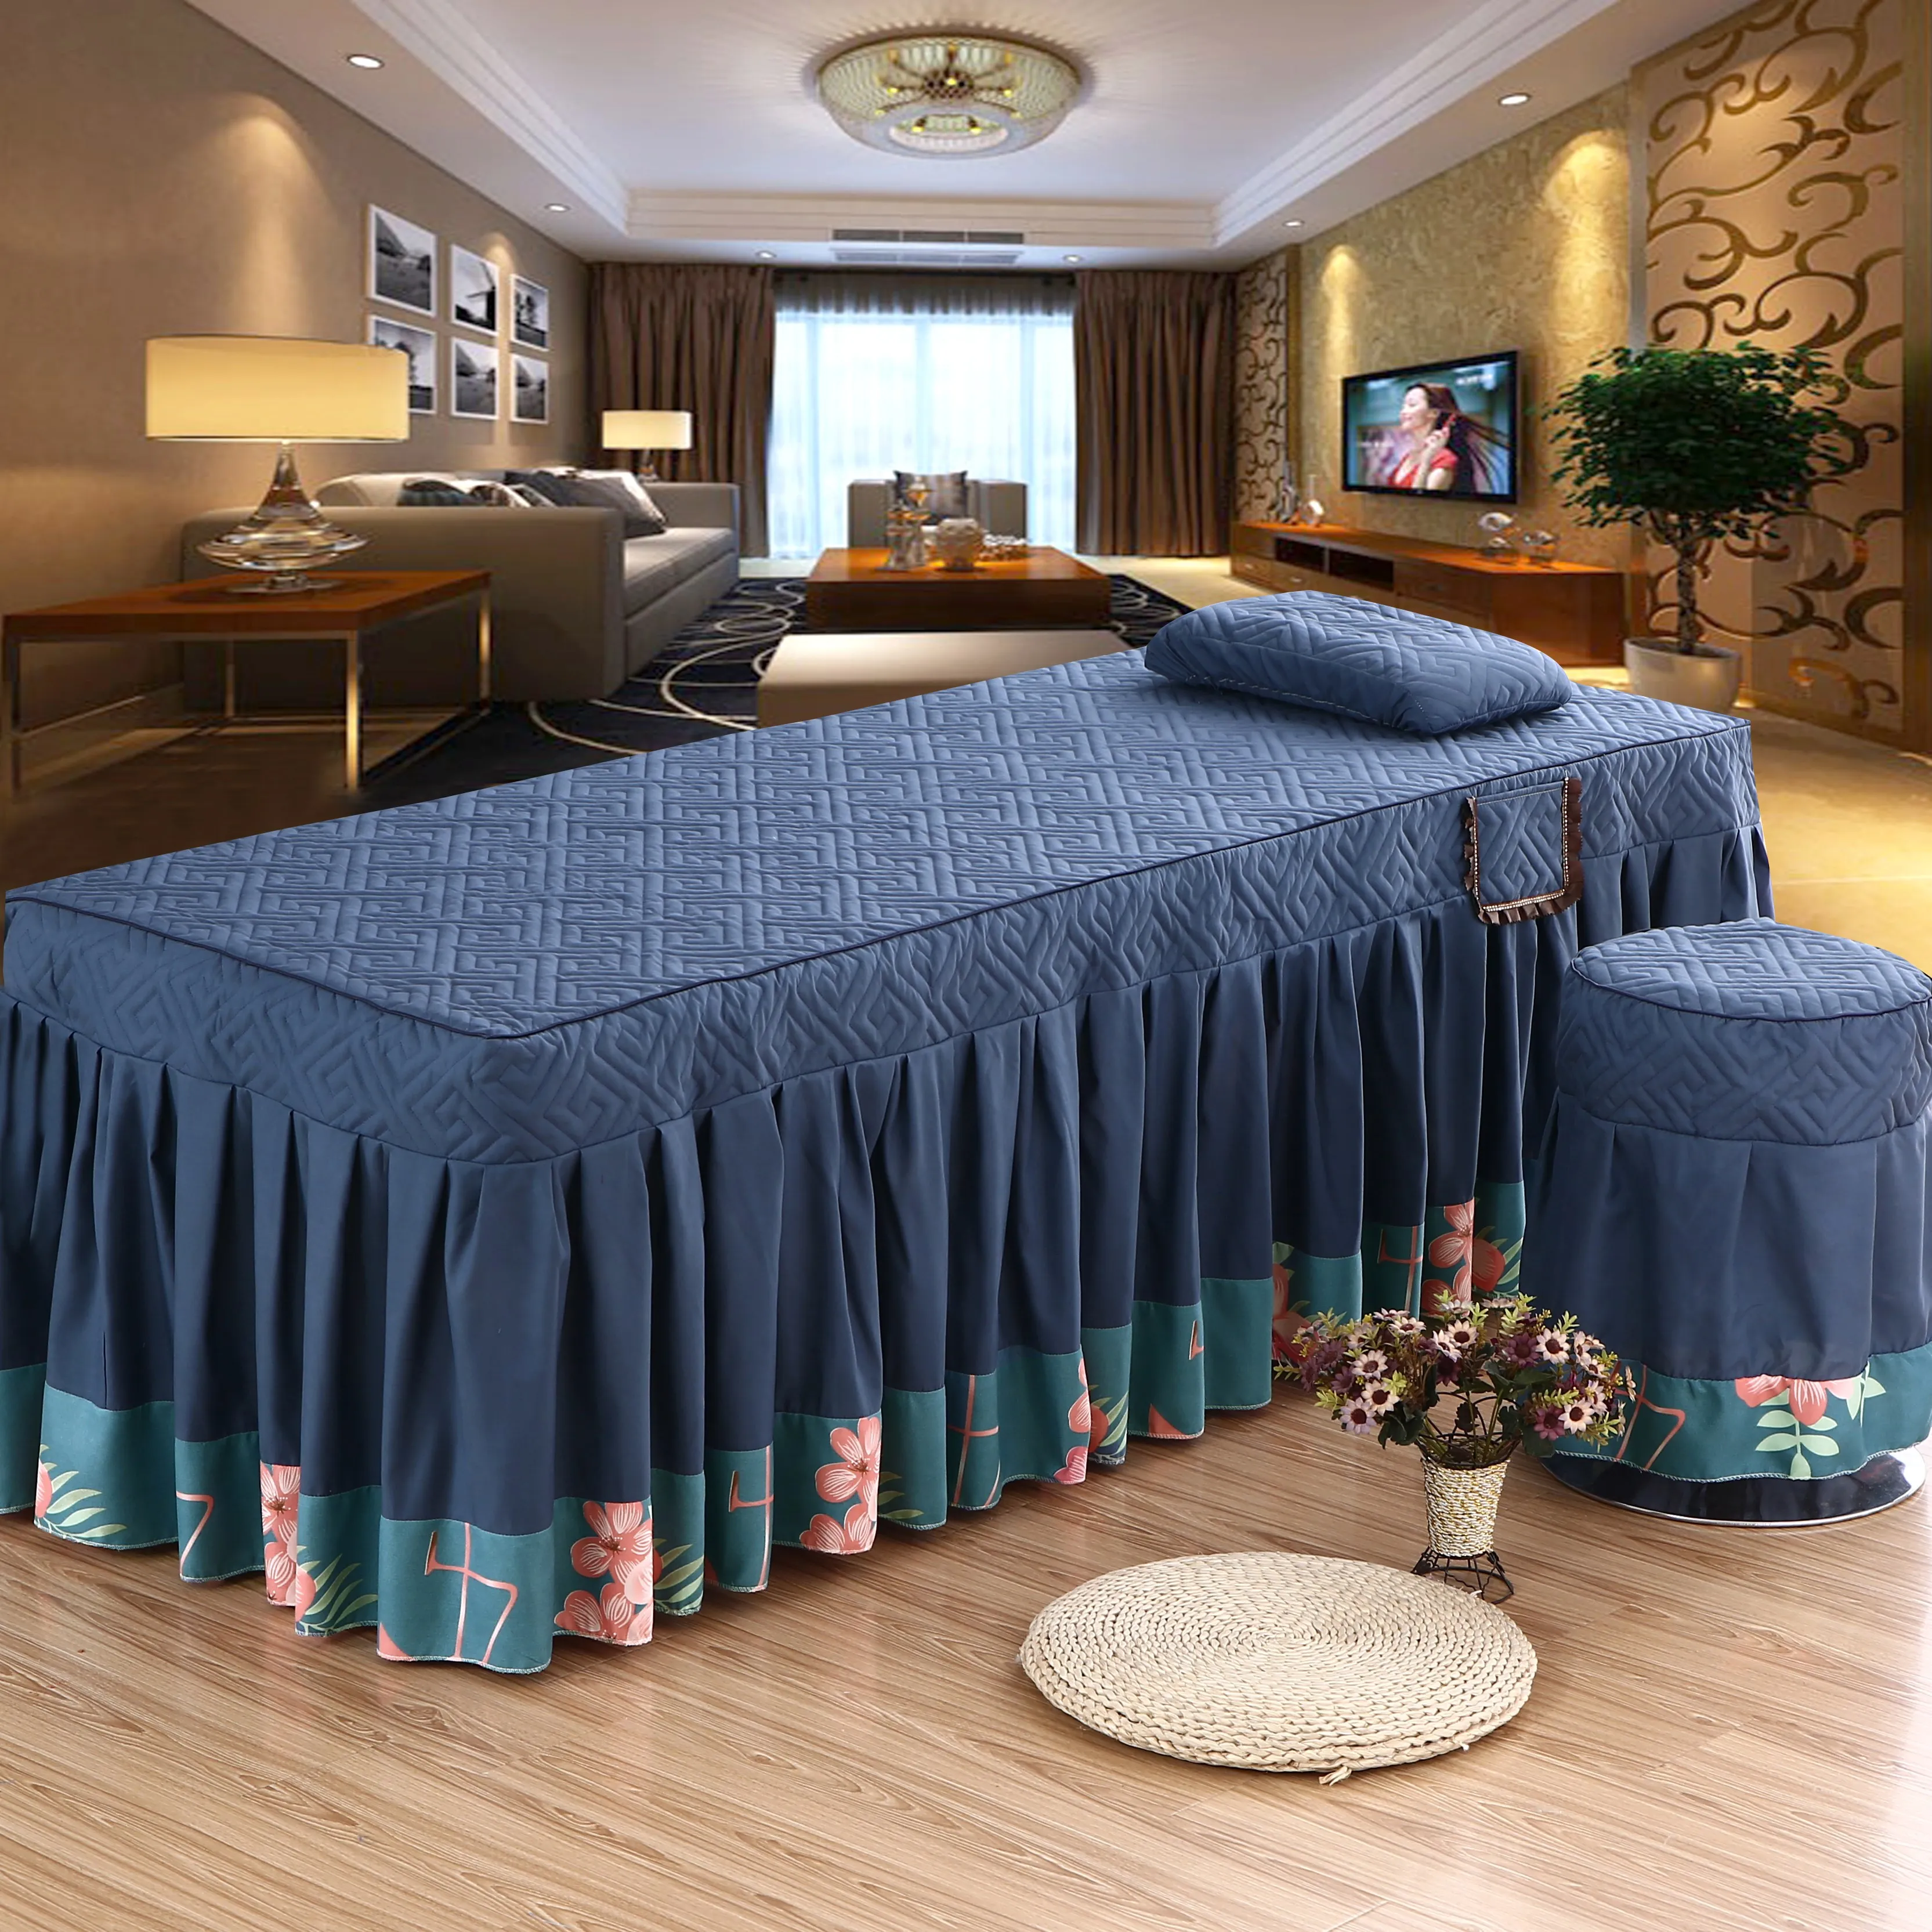 2pcs Beauty Salon Bed Sheet Pillowcase Set SPA Skin-Friendly Massage Table Bed Cover Sheet Bedskirt Colchas with Hole Bed Linens